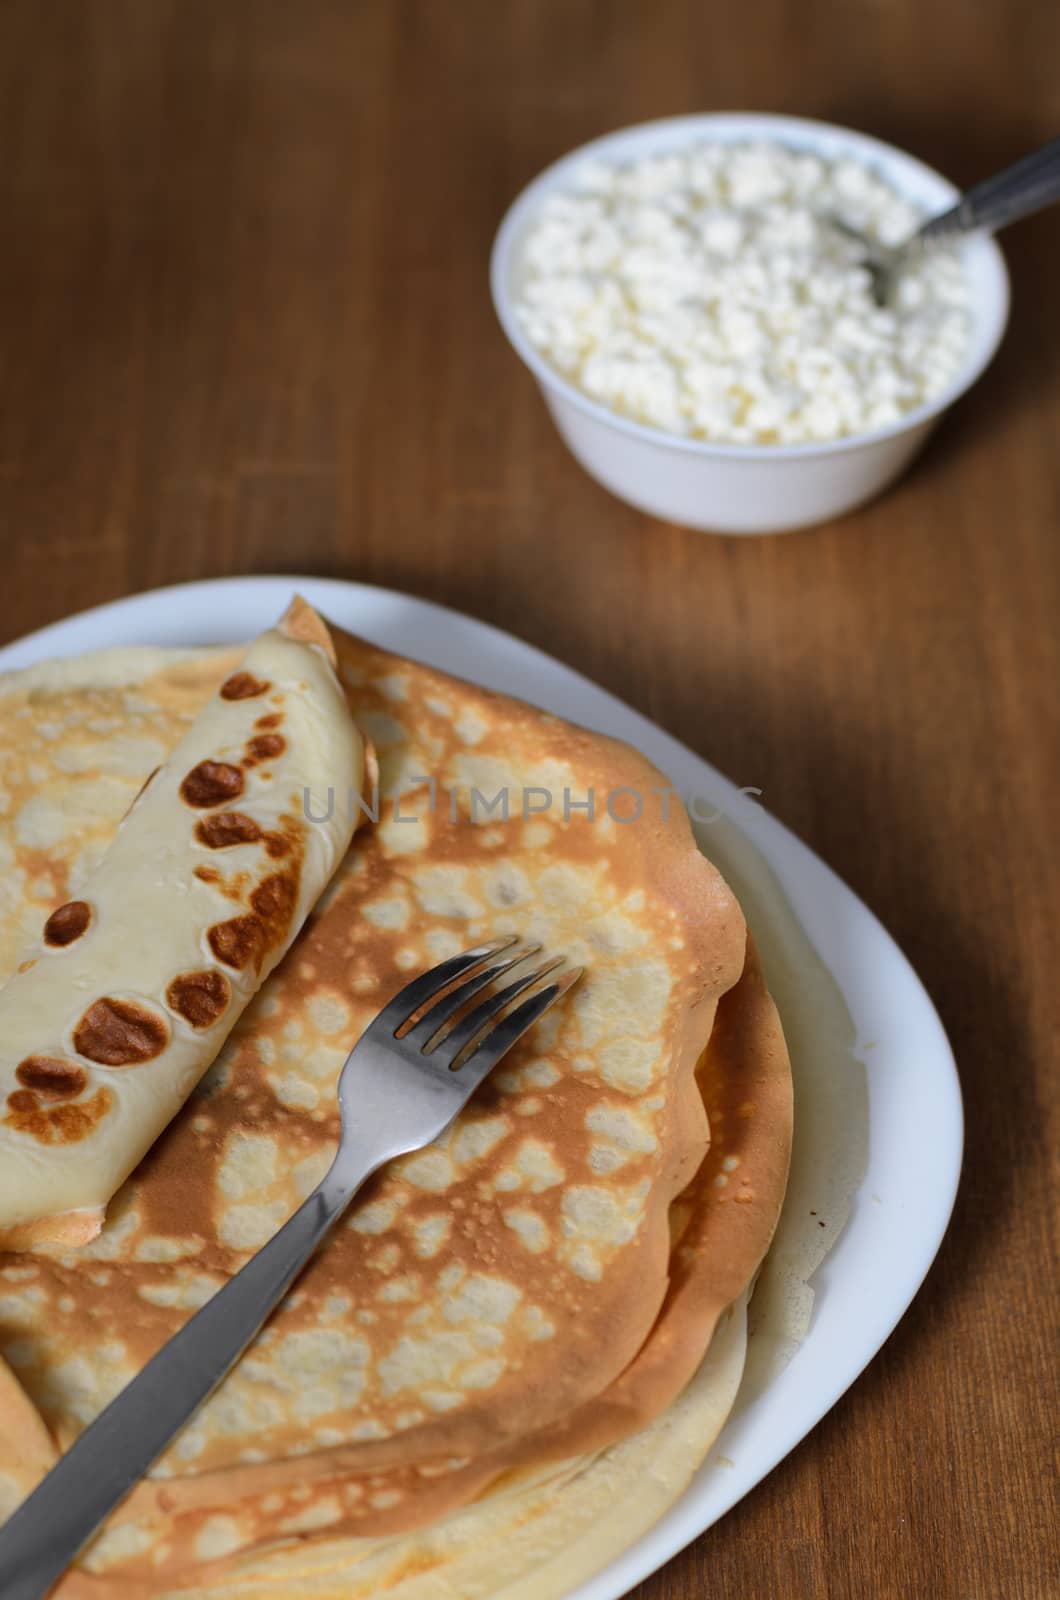 homemade pancakes by Andreua